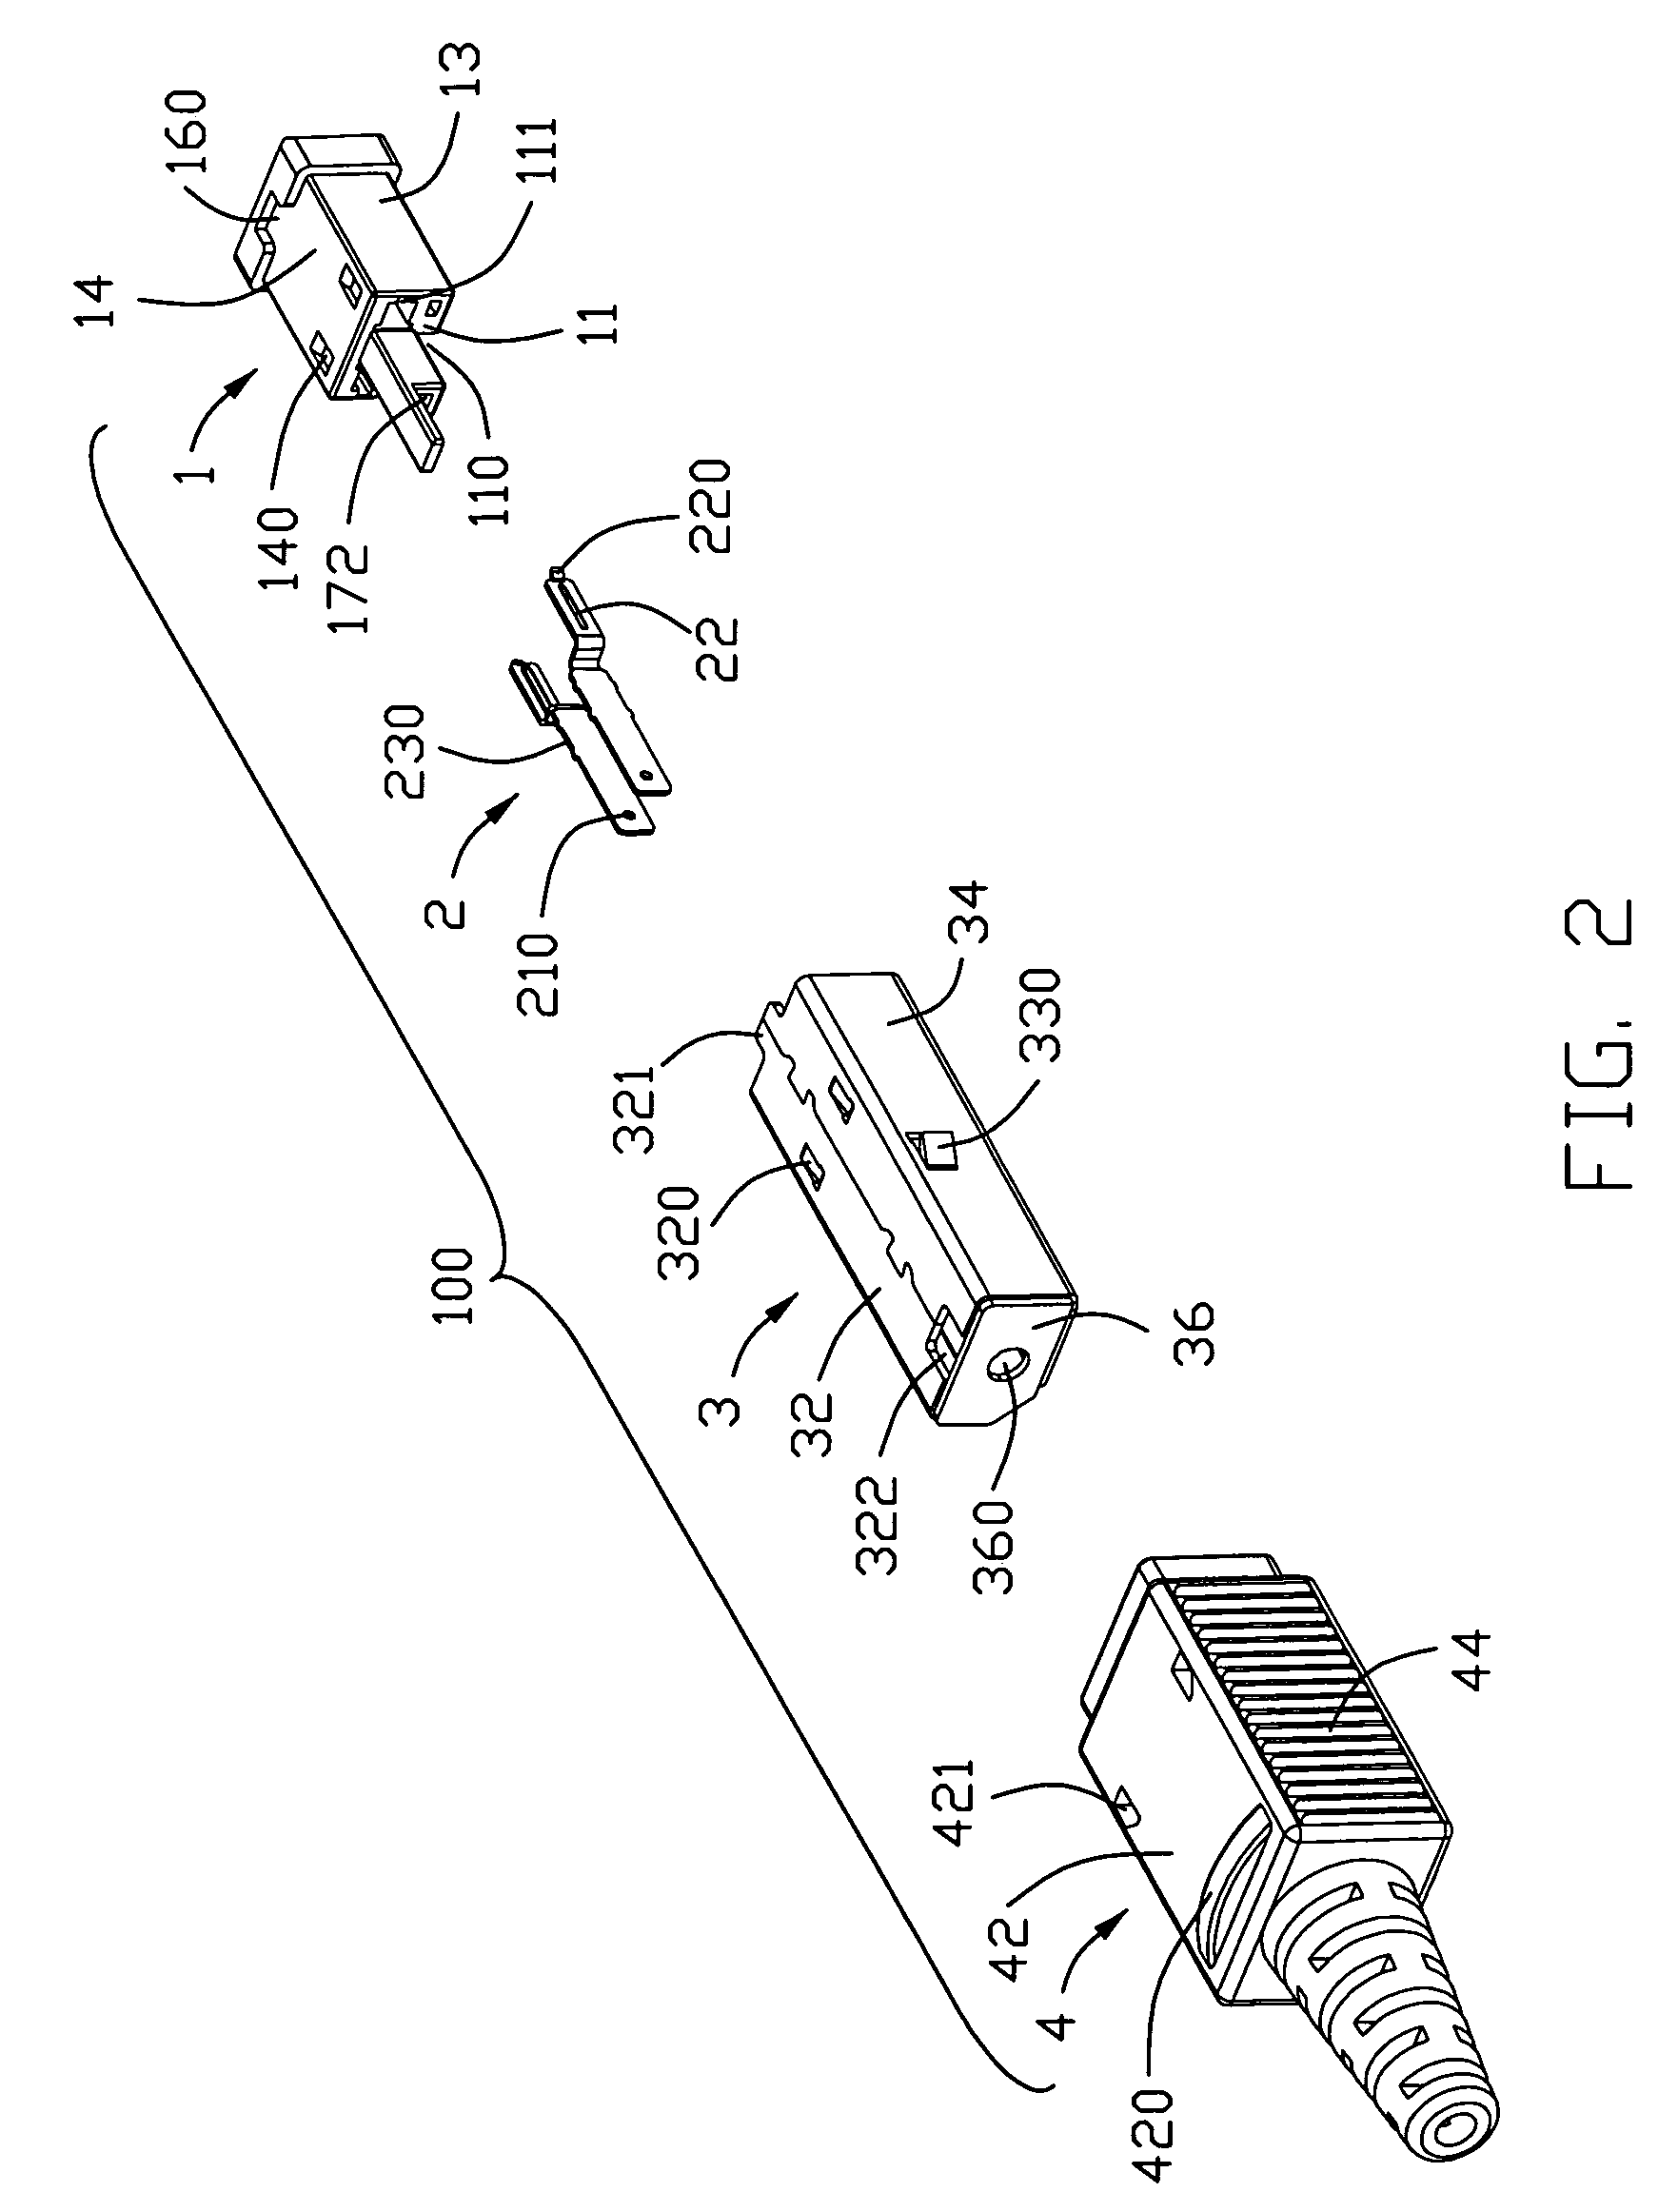 Electrical connector with contact terminals isolated from each other within the housing